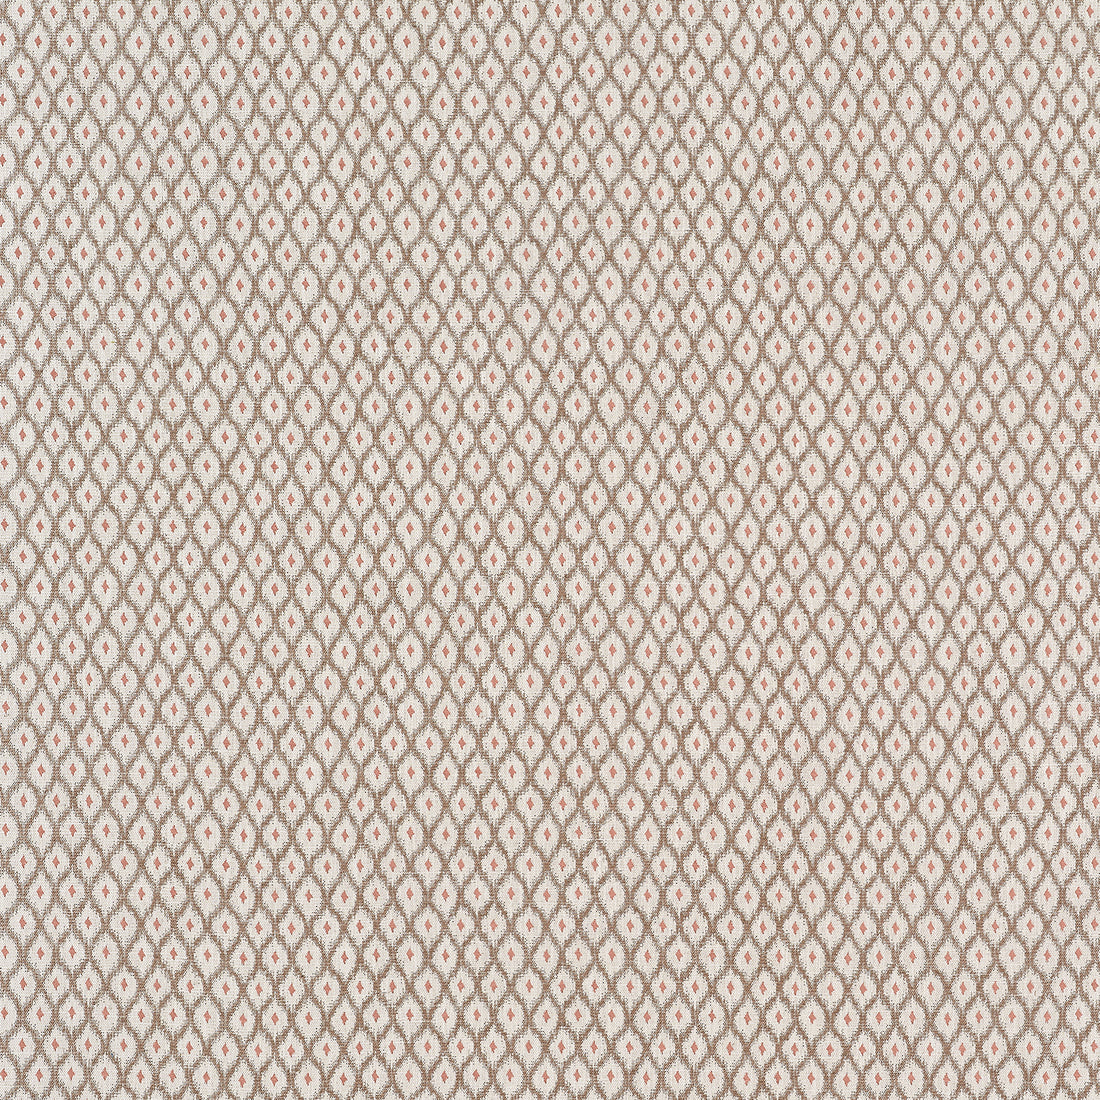 Josephine fabric in linen color - pattern number W81901 - by Thibaut in the Companions collection